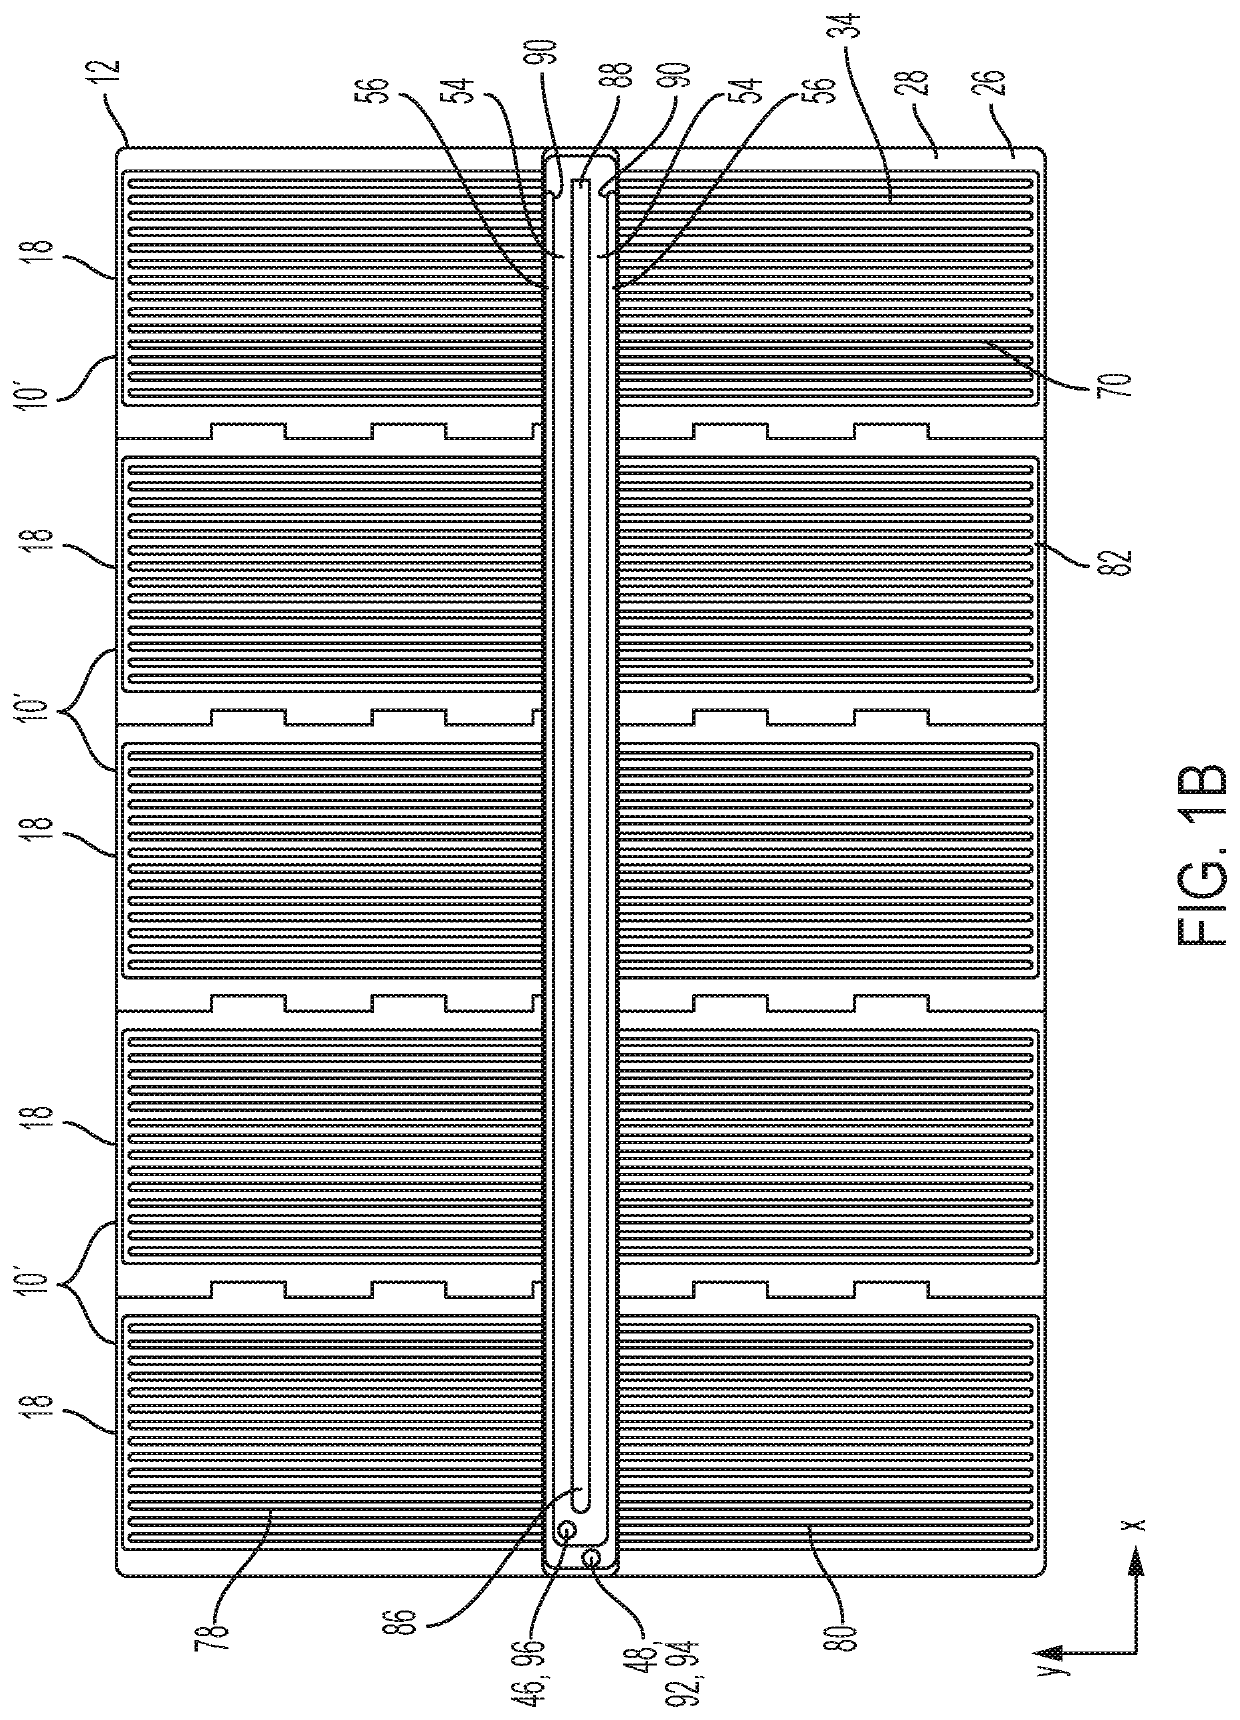 Modular heat exchangers for battery thermal modulation